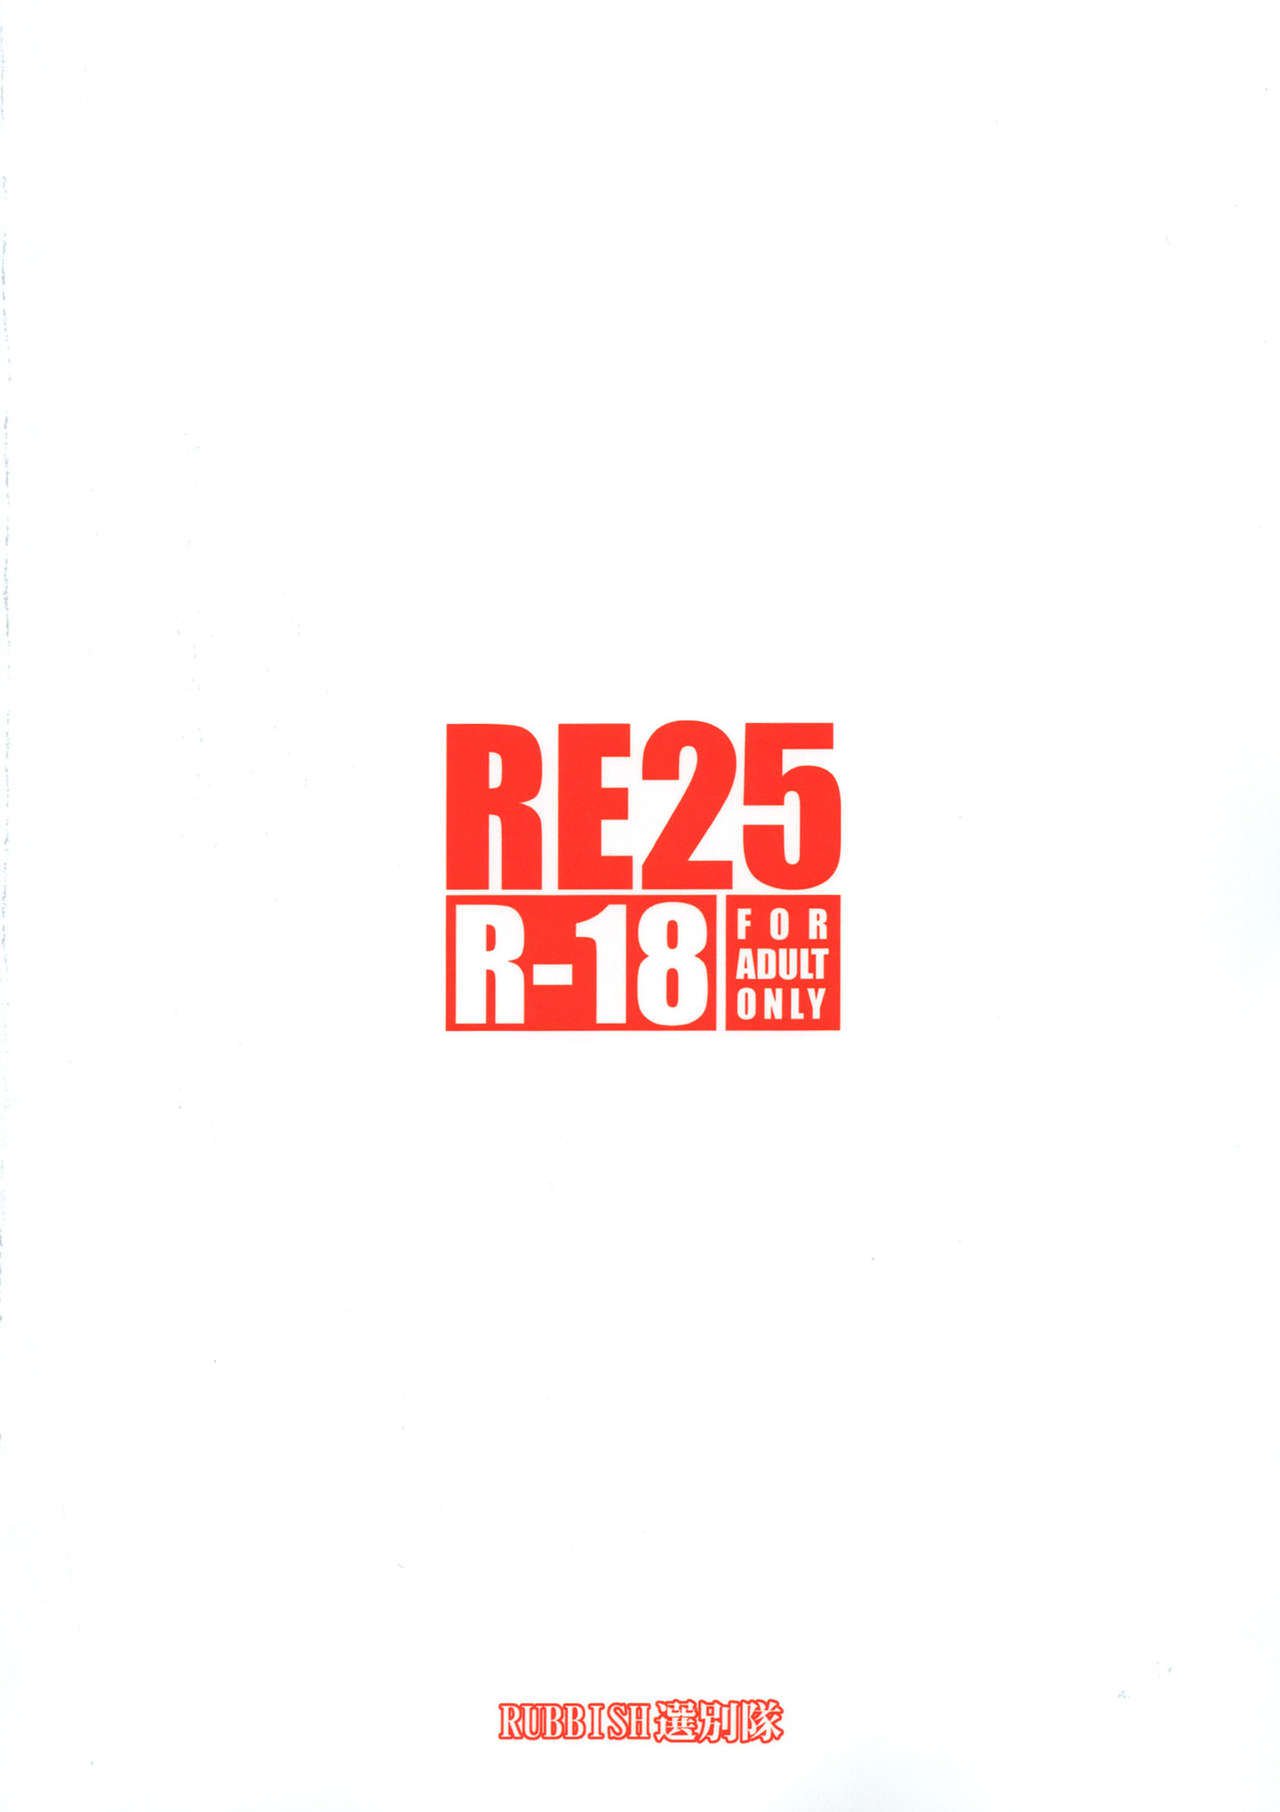 RE25